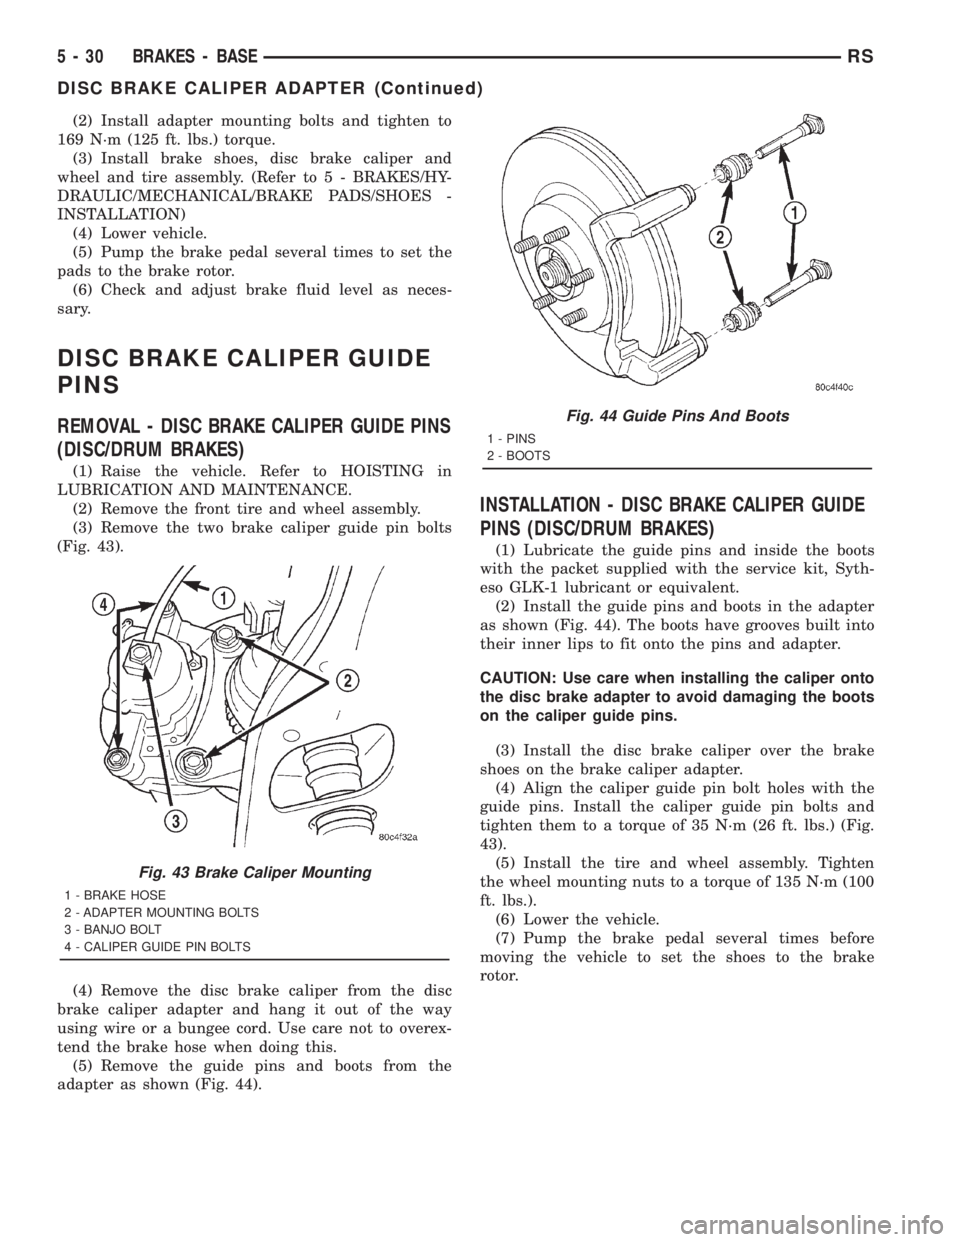 CHRYSLER VOYAGER 2001  Service Manual (2) Install adapter mounting bolts and tighten to
169 N´m (125 ft. lbs.) torque.
(3) Install brake shoes, disc brake caliper and
wheel and tire assembly. (Refer to 5 - BRAKES/HY-
DRAULIC/MECHANICAL/B